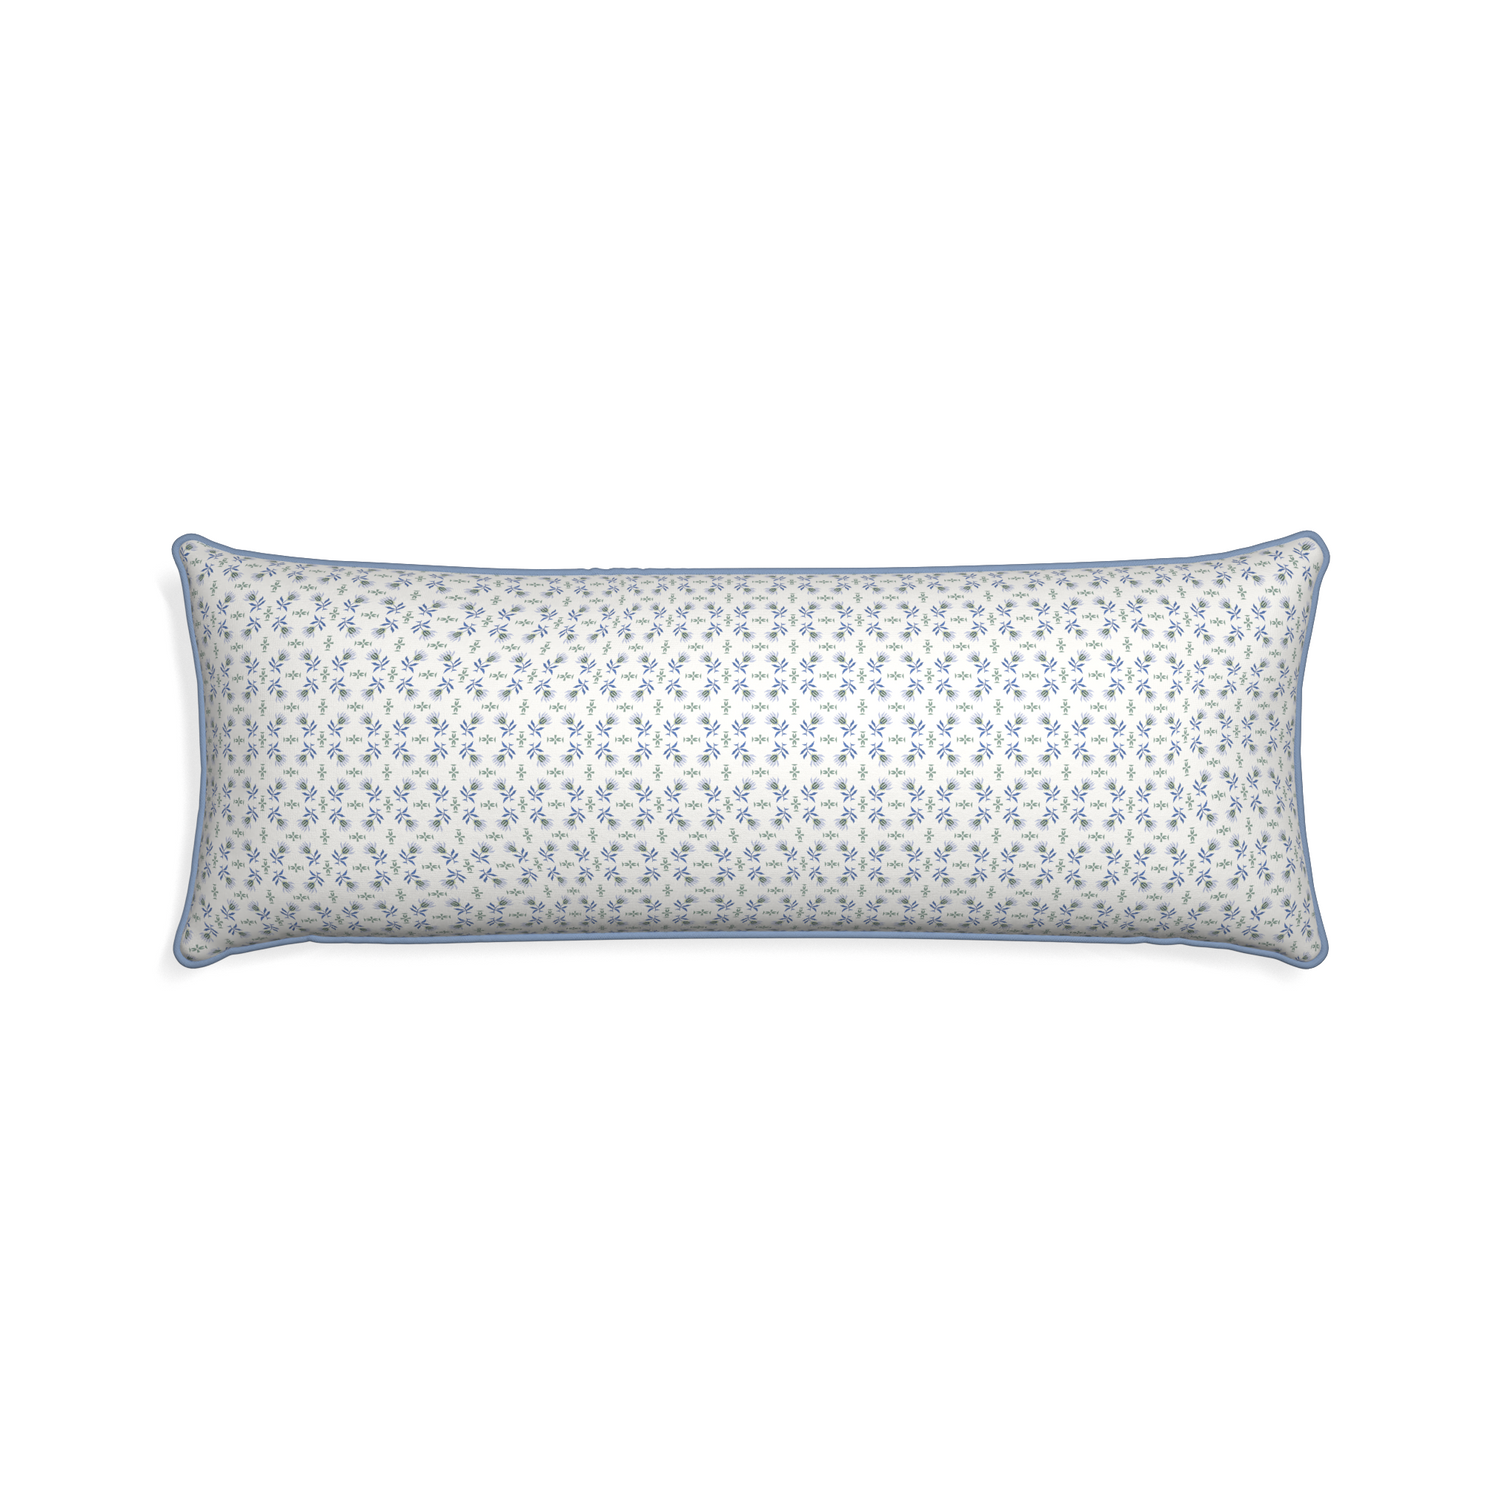 Xl-lumbar lee custom pillow with sky piping on white background